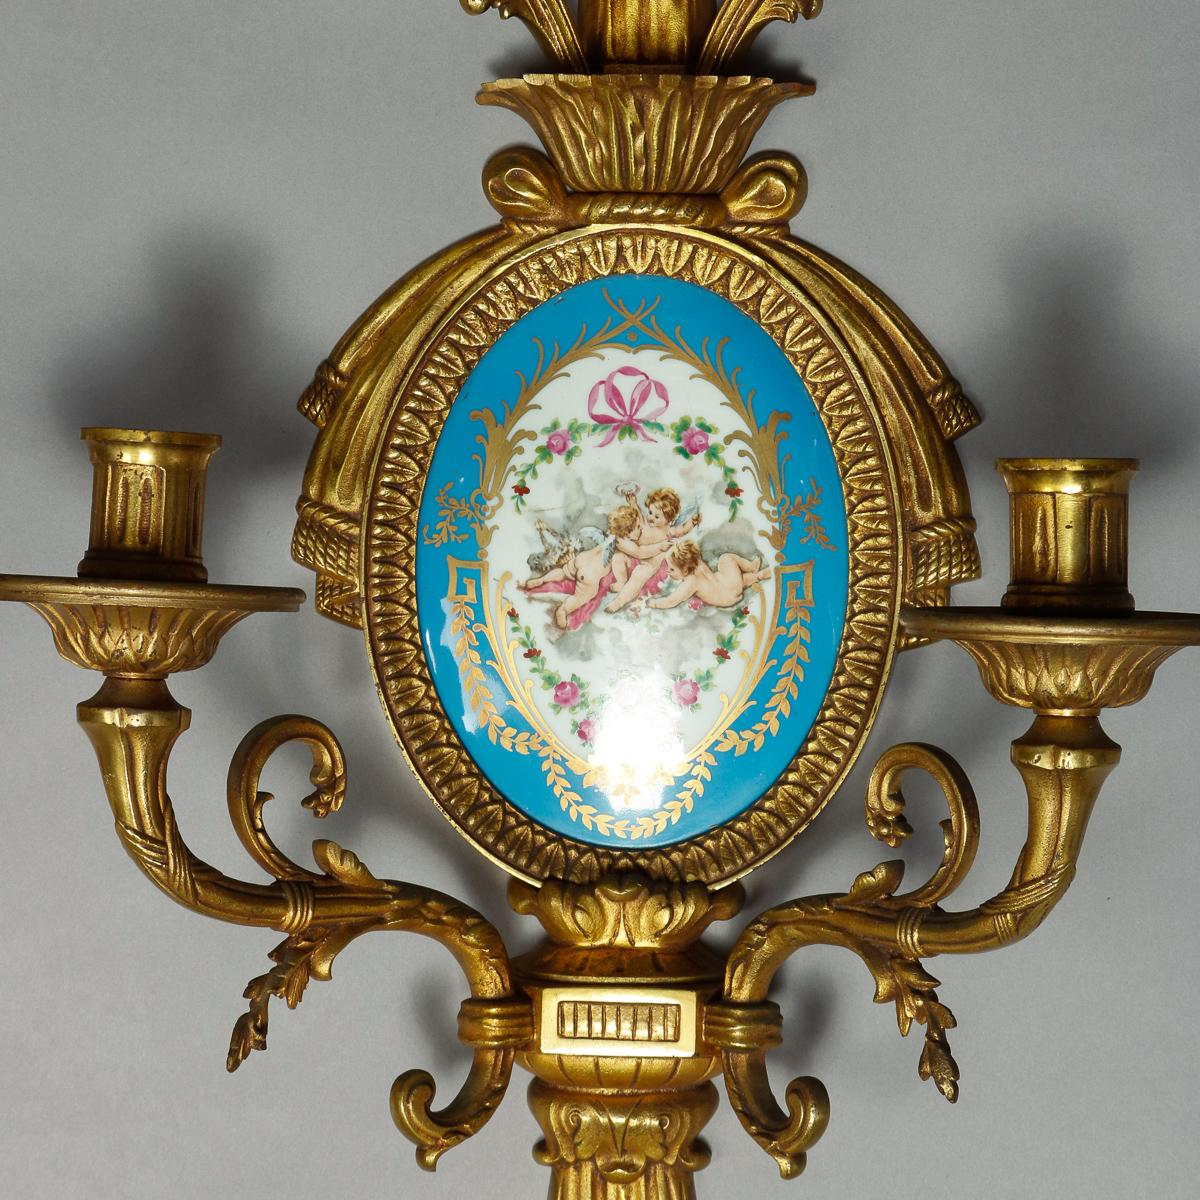 A pair of antique French wall sconces each offer a cast and gilt bronze tassel form frame housing a central hand painted and gilt Sevres porcelain plaque and having four scroll and foliate form arms terminating in candle sockets, circa